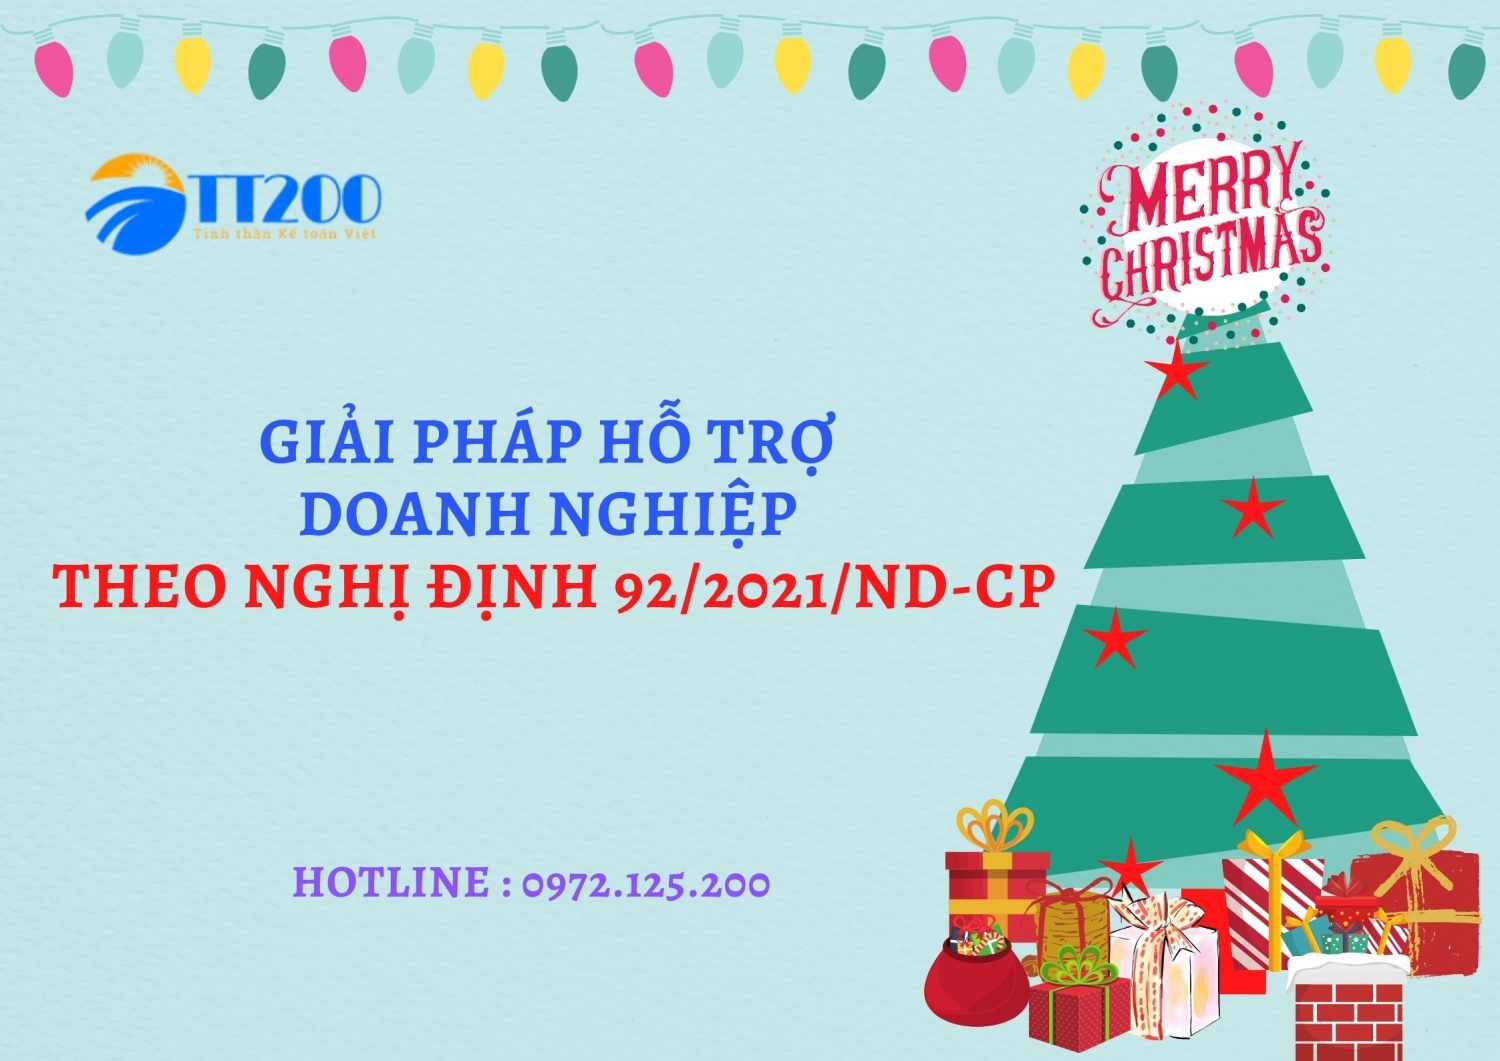 NGHI DINH 92 2021 ND CP